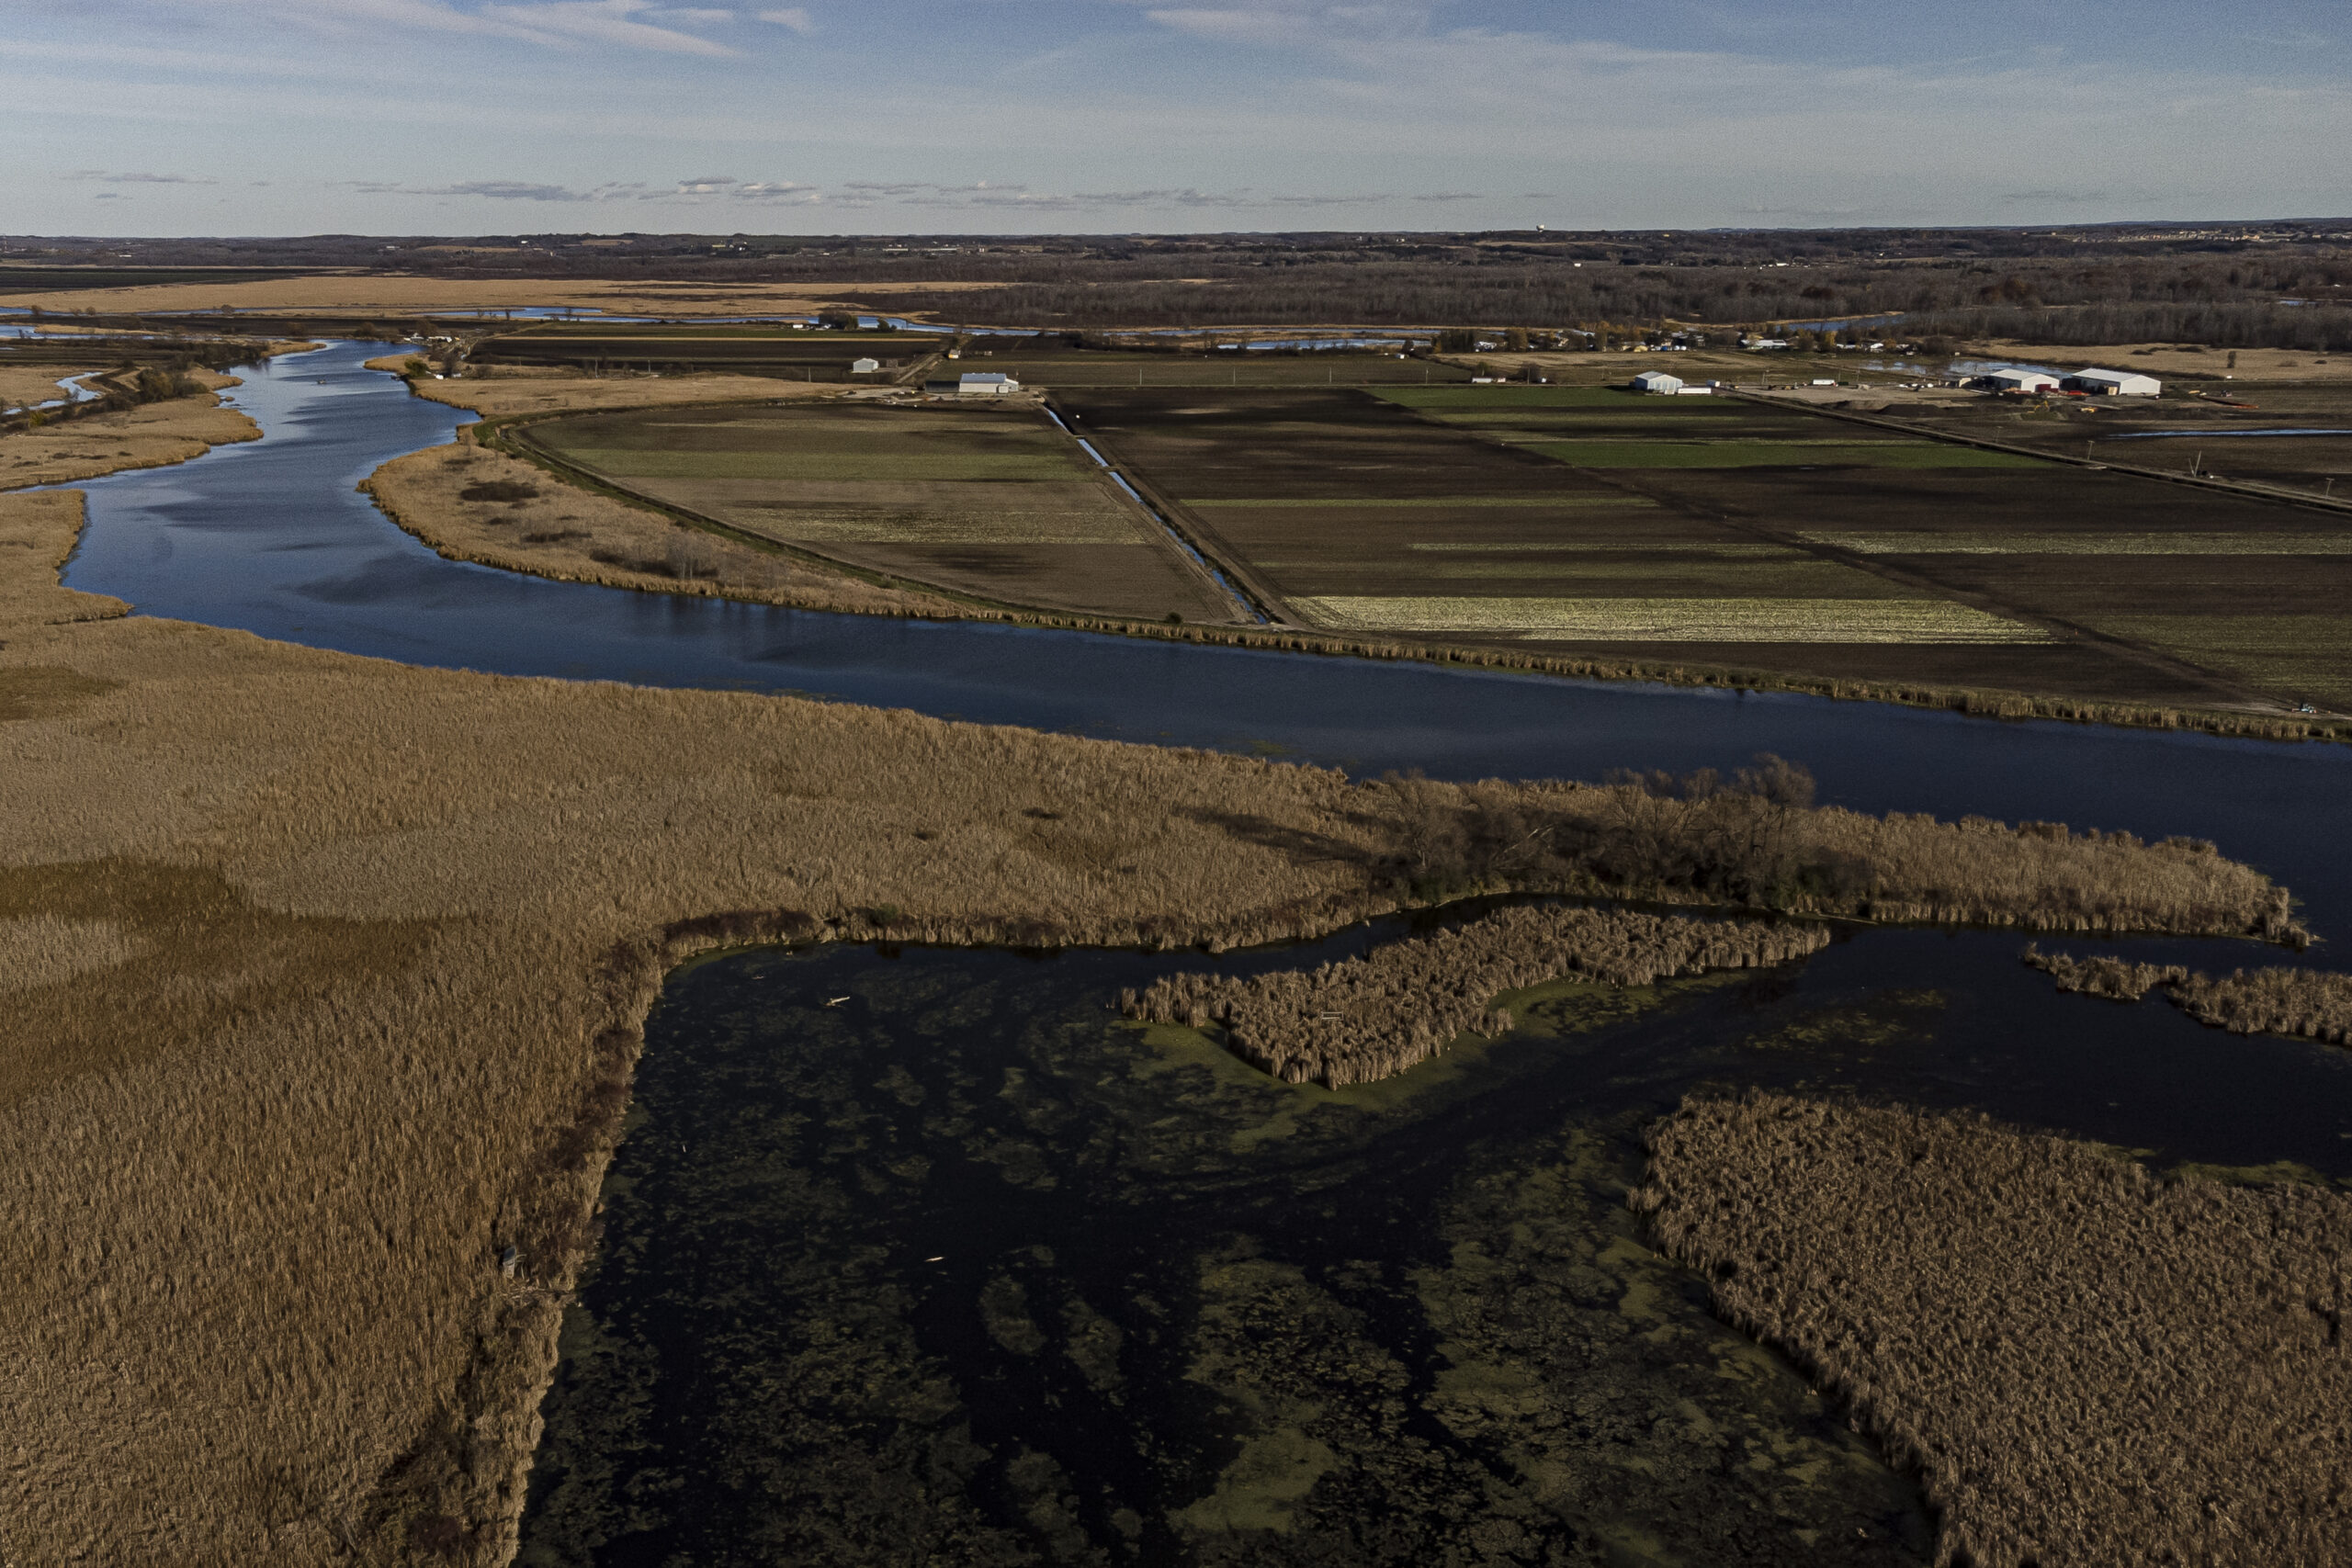 An aerial view of farmlands and reeds in the Holland Marsh, with the Holland River running through the middle